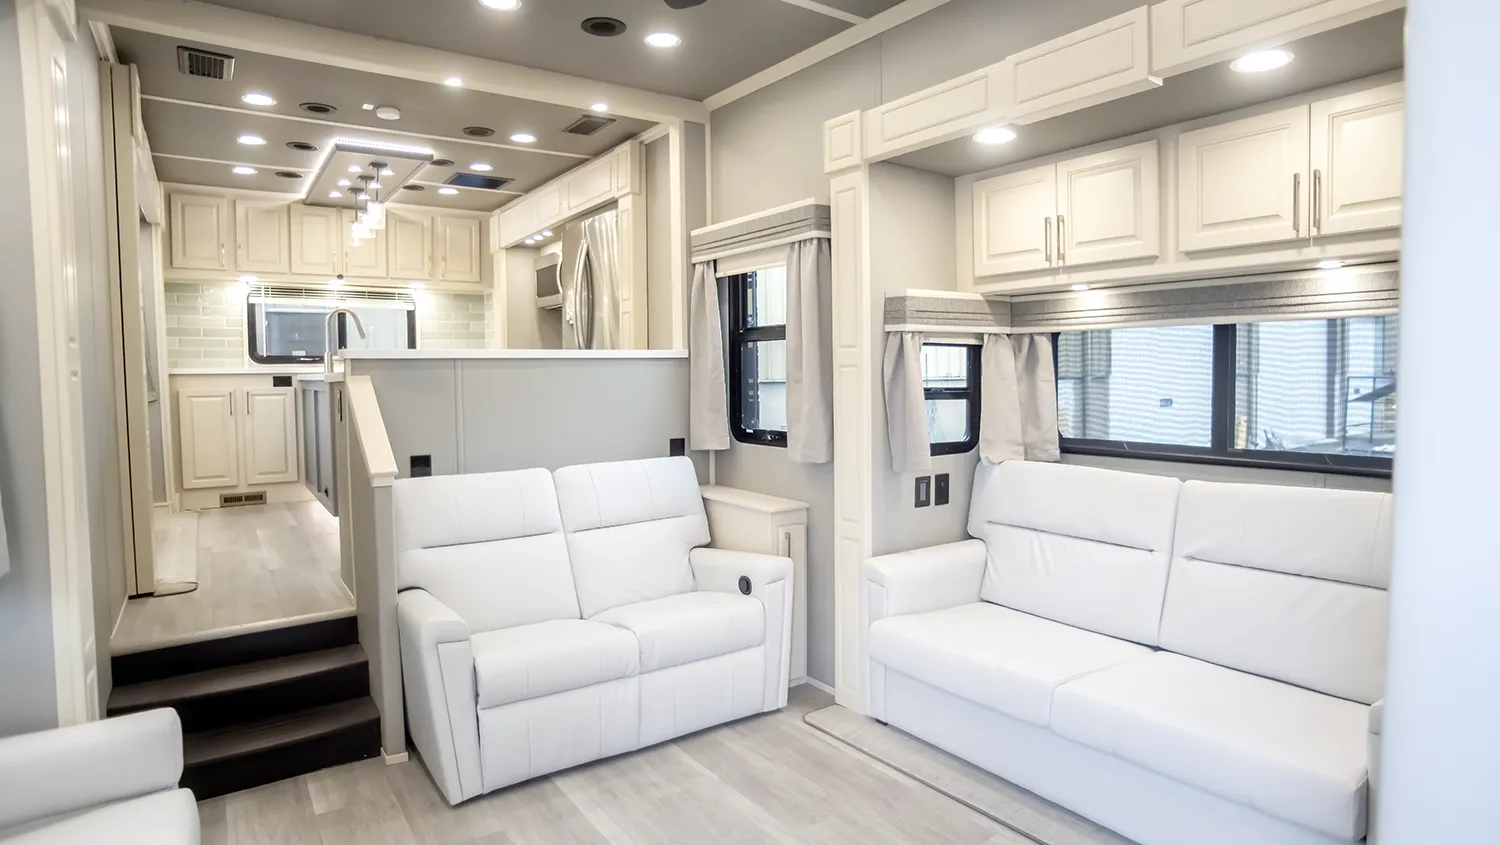 The living room of the the Luxe Elite 46RKB, a rear kitchen fifth wheel.